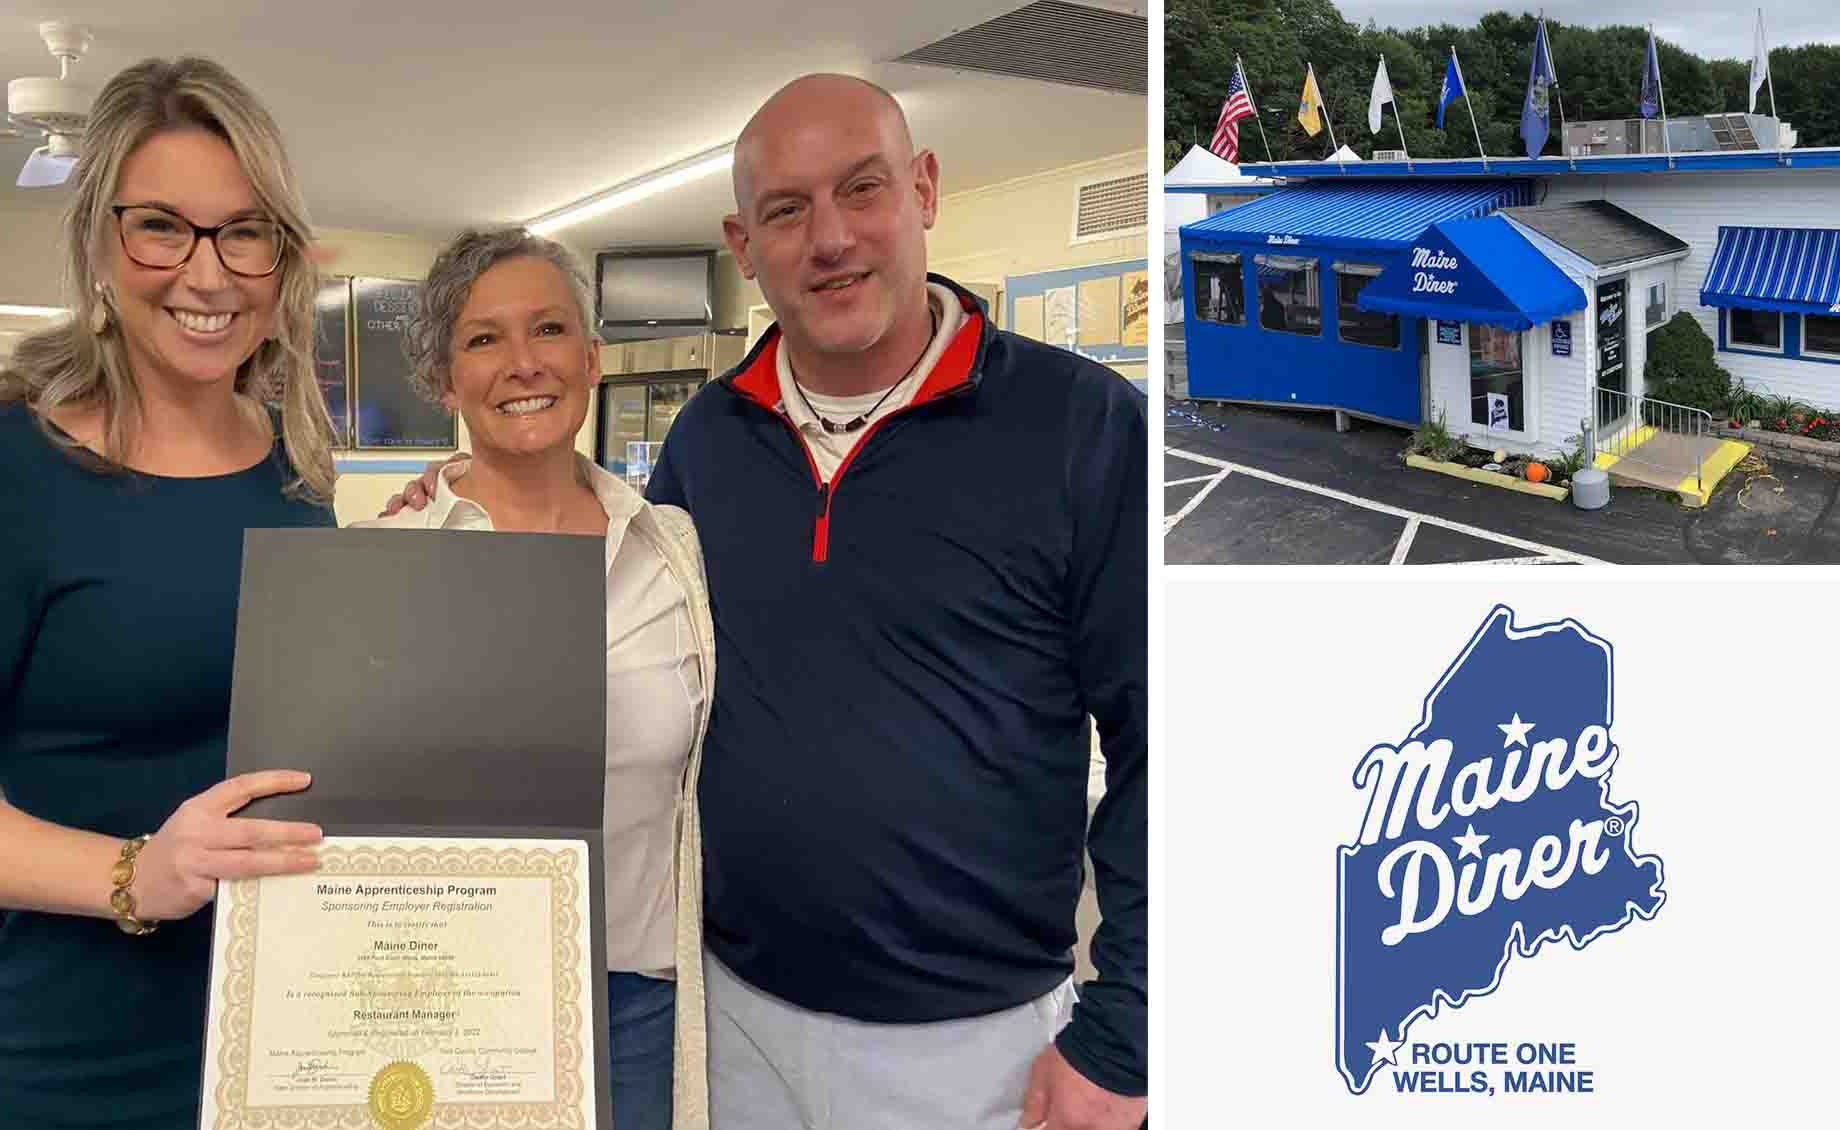 YCCC and Maine Diner Announce New Restaurant Manager Apprenticeship Program                                                                                                        